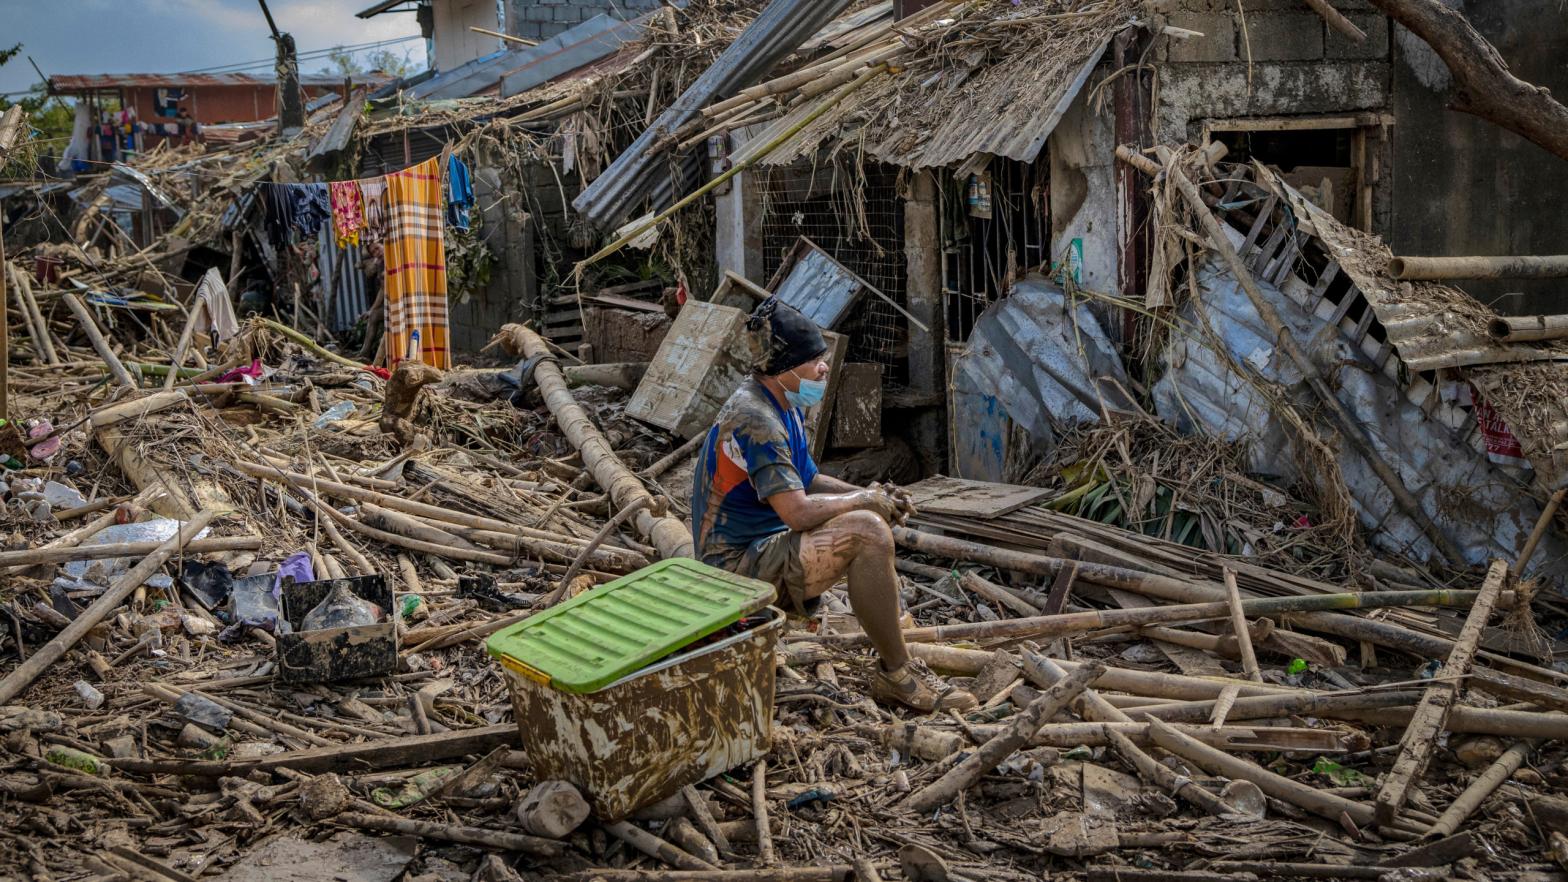 A resident sits outside destroyed houses after Typhoon Vamco hit on Nov. 14, 2020 in Rodriguez, Philippines. (Photo: Ezra Acayan, Getty Images)